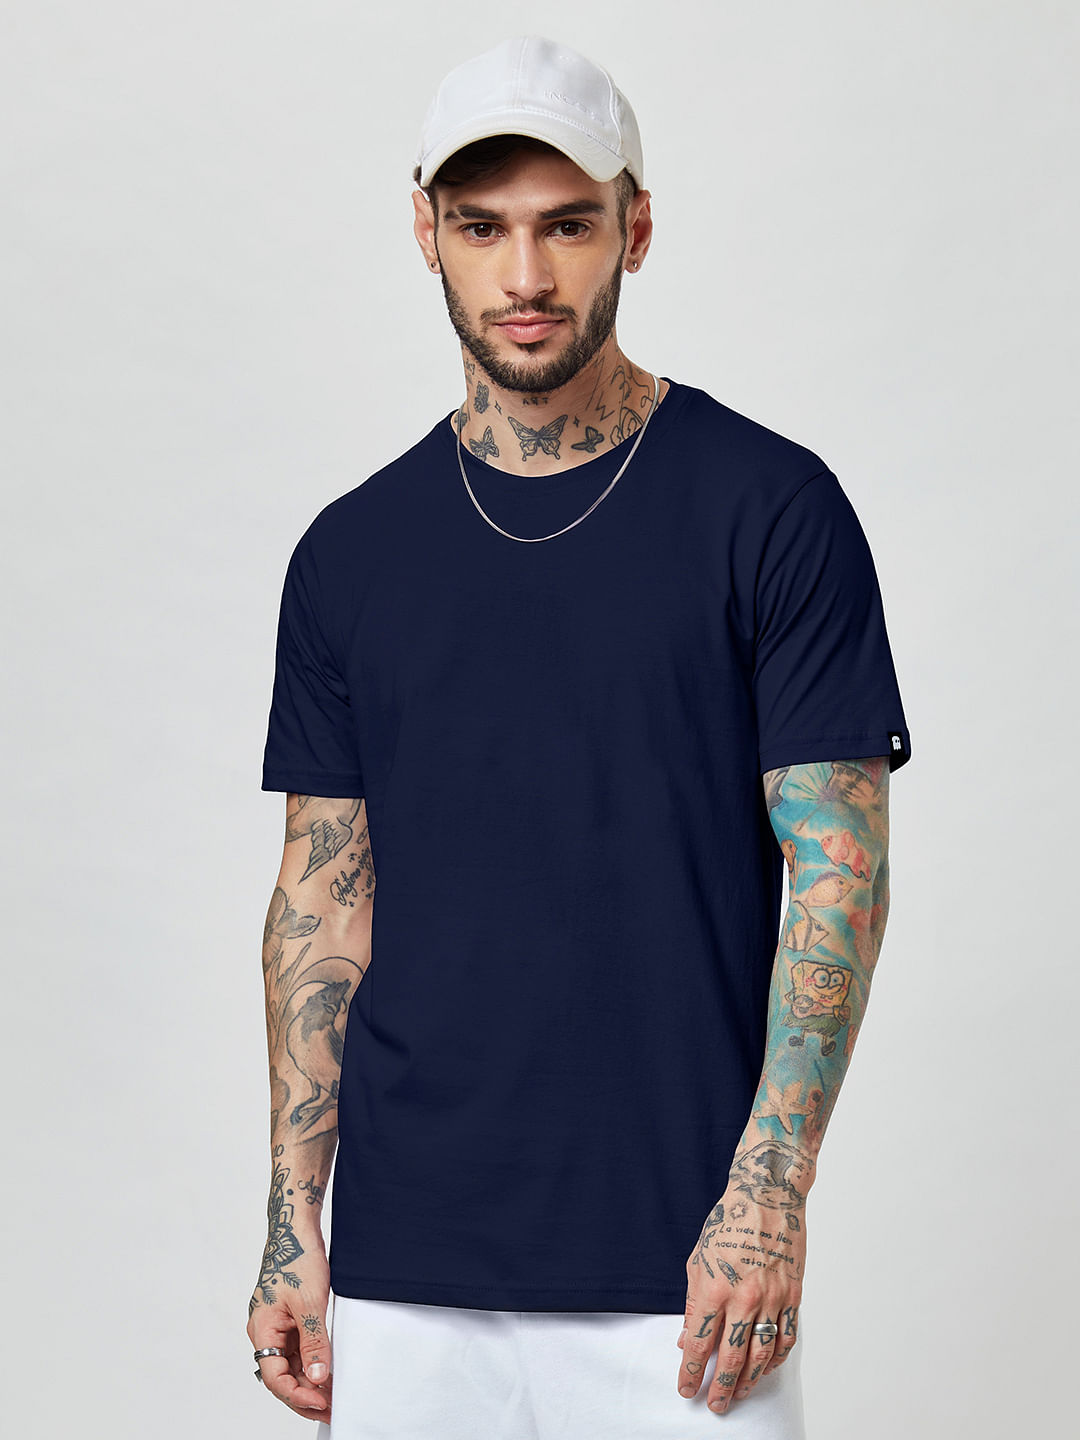 Buy Solids: Navy Blue Half Sleeve T-Shirts online at The Souled Store.